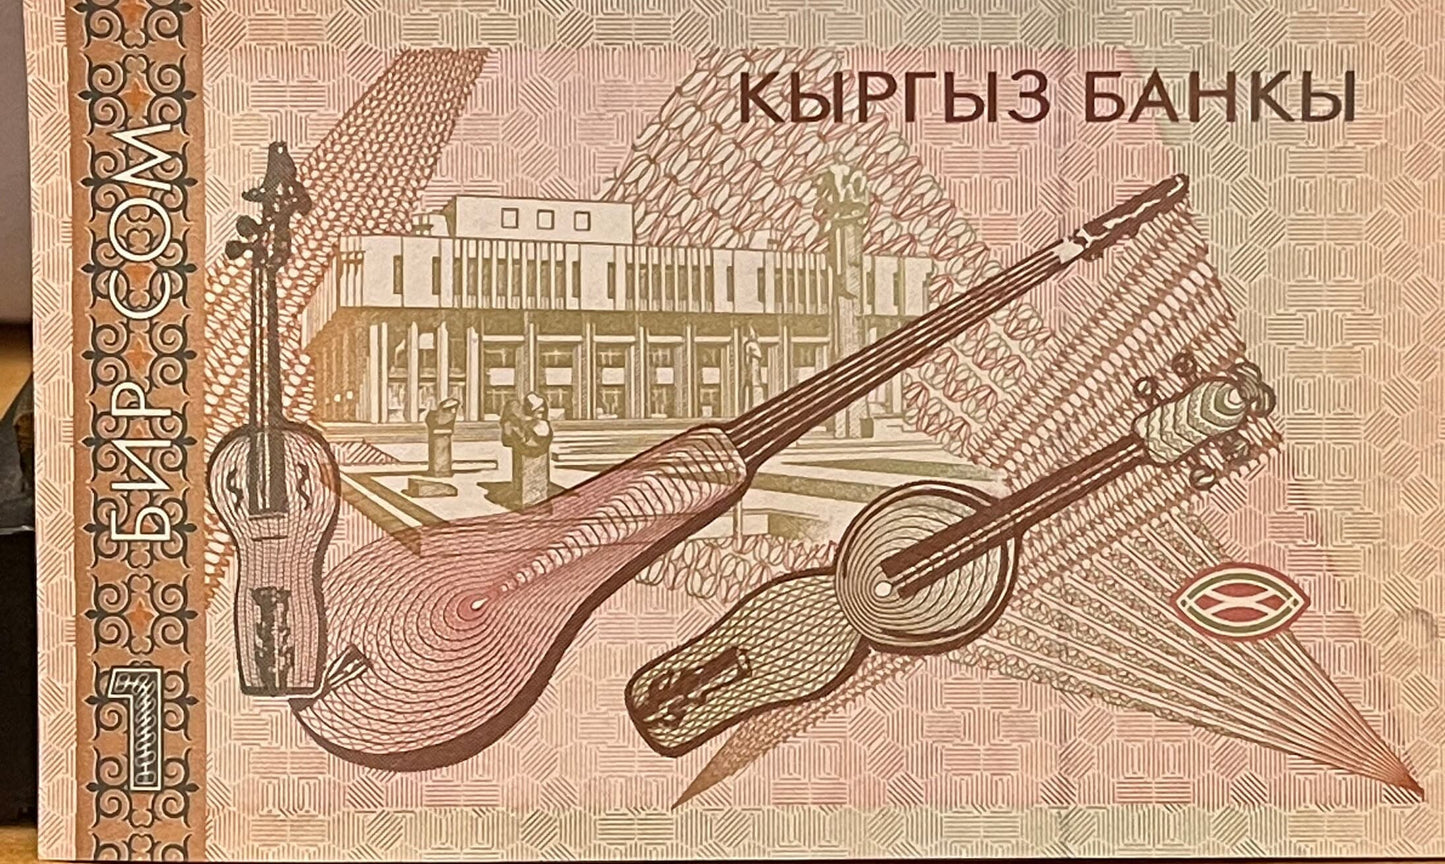 Komuz Lute and Kyl Kyyak Viols & Composer Abdylas Maldybaev 1 Som Kyrgyzstan Authentic Banknote Money for Collage (Philharmonic Hall) 1999